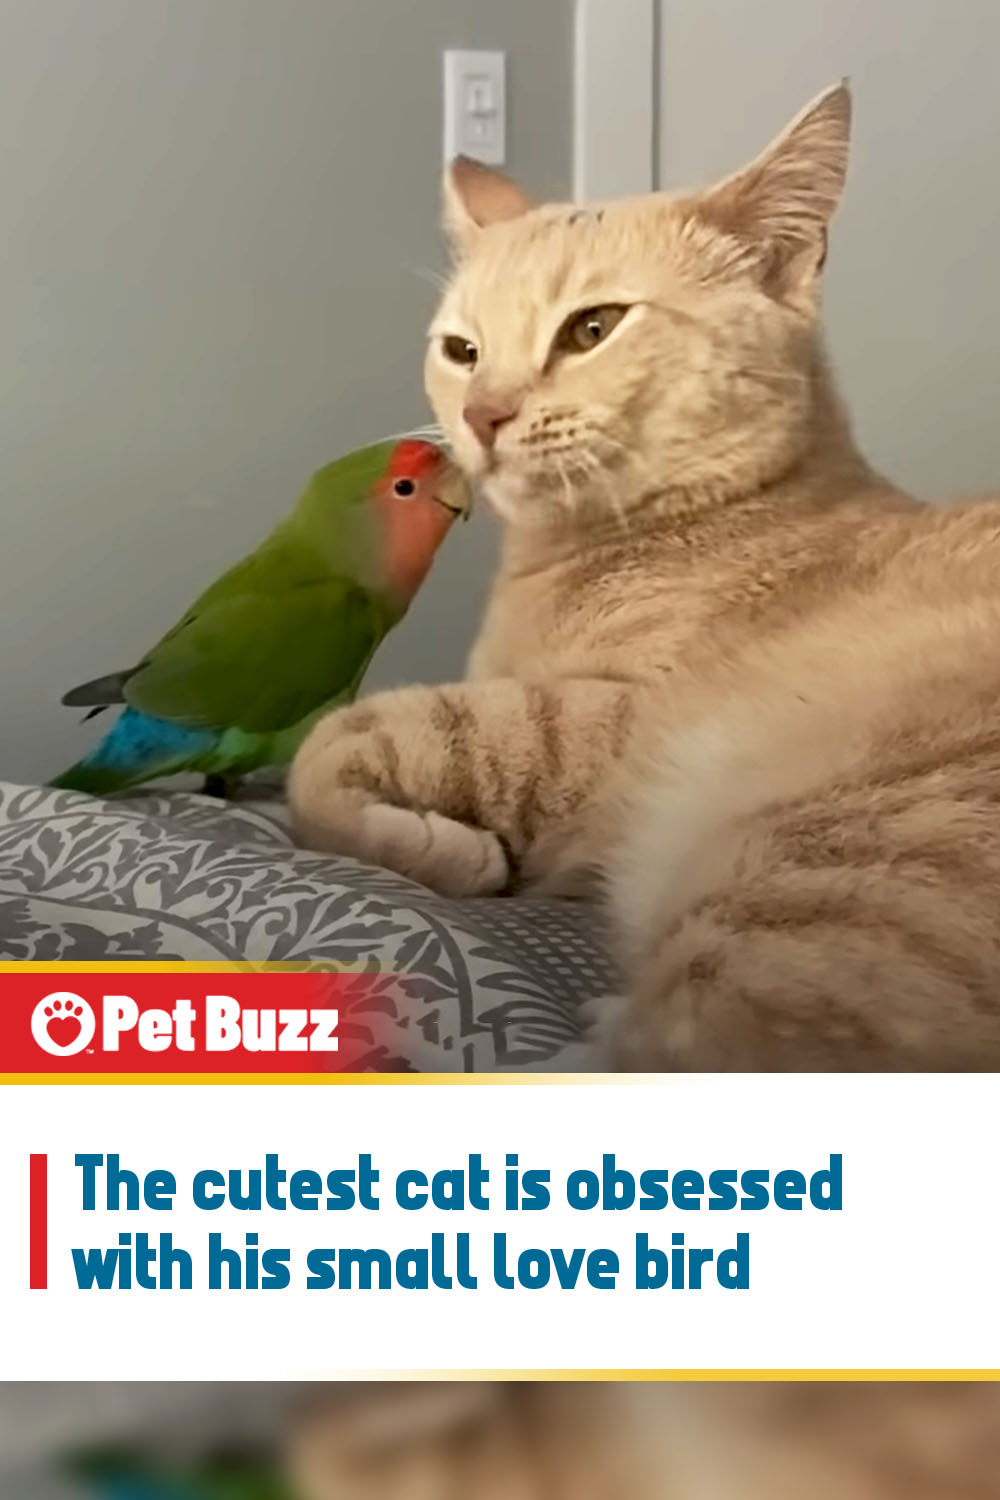 The cutest cat is obsessed with his small love bird